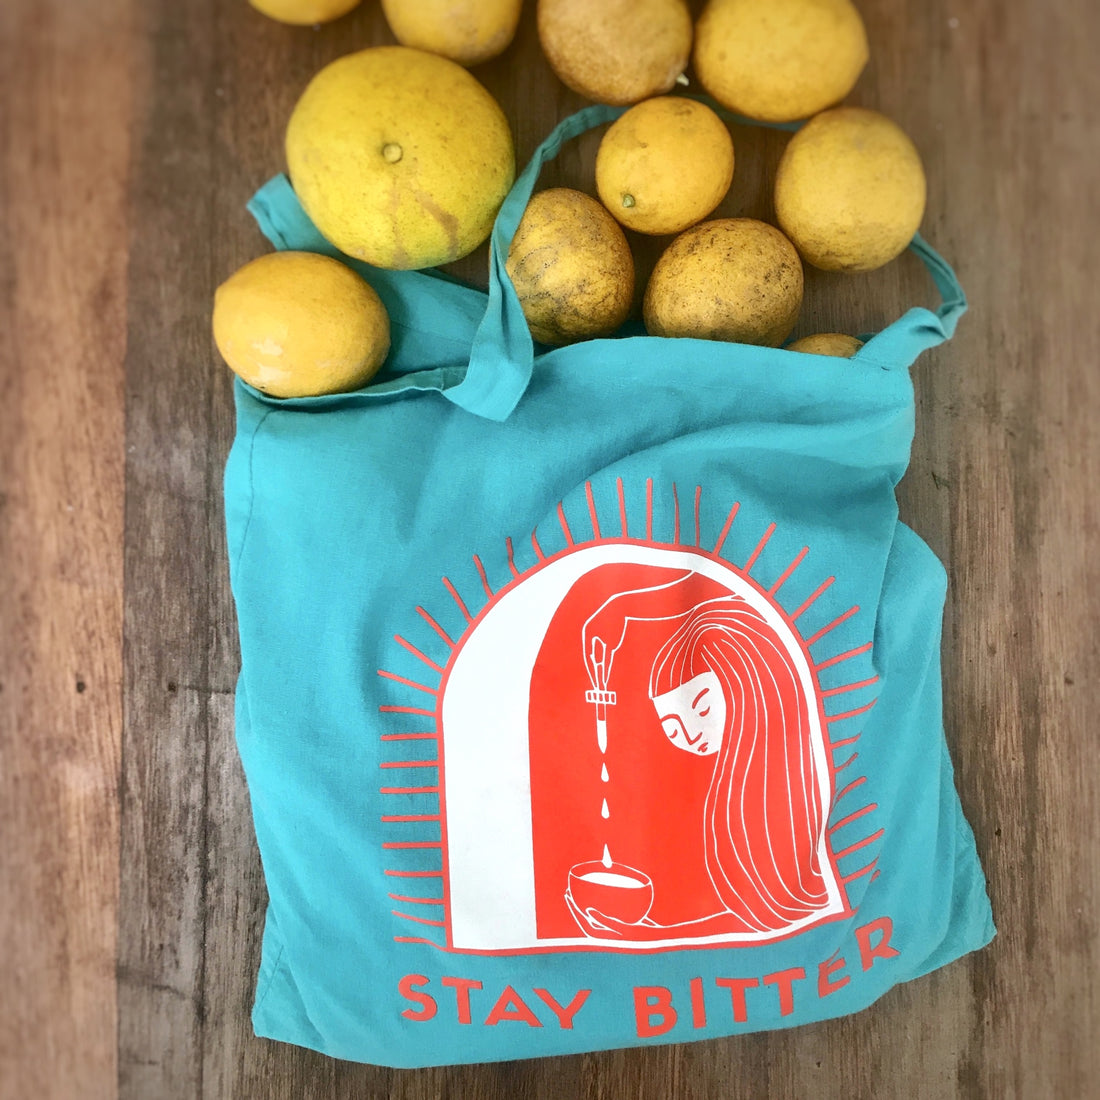 Stay Bitter Tote Bag